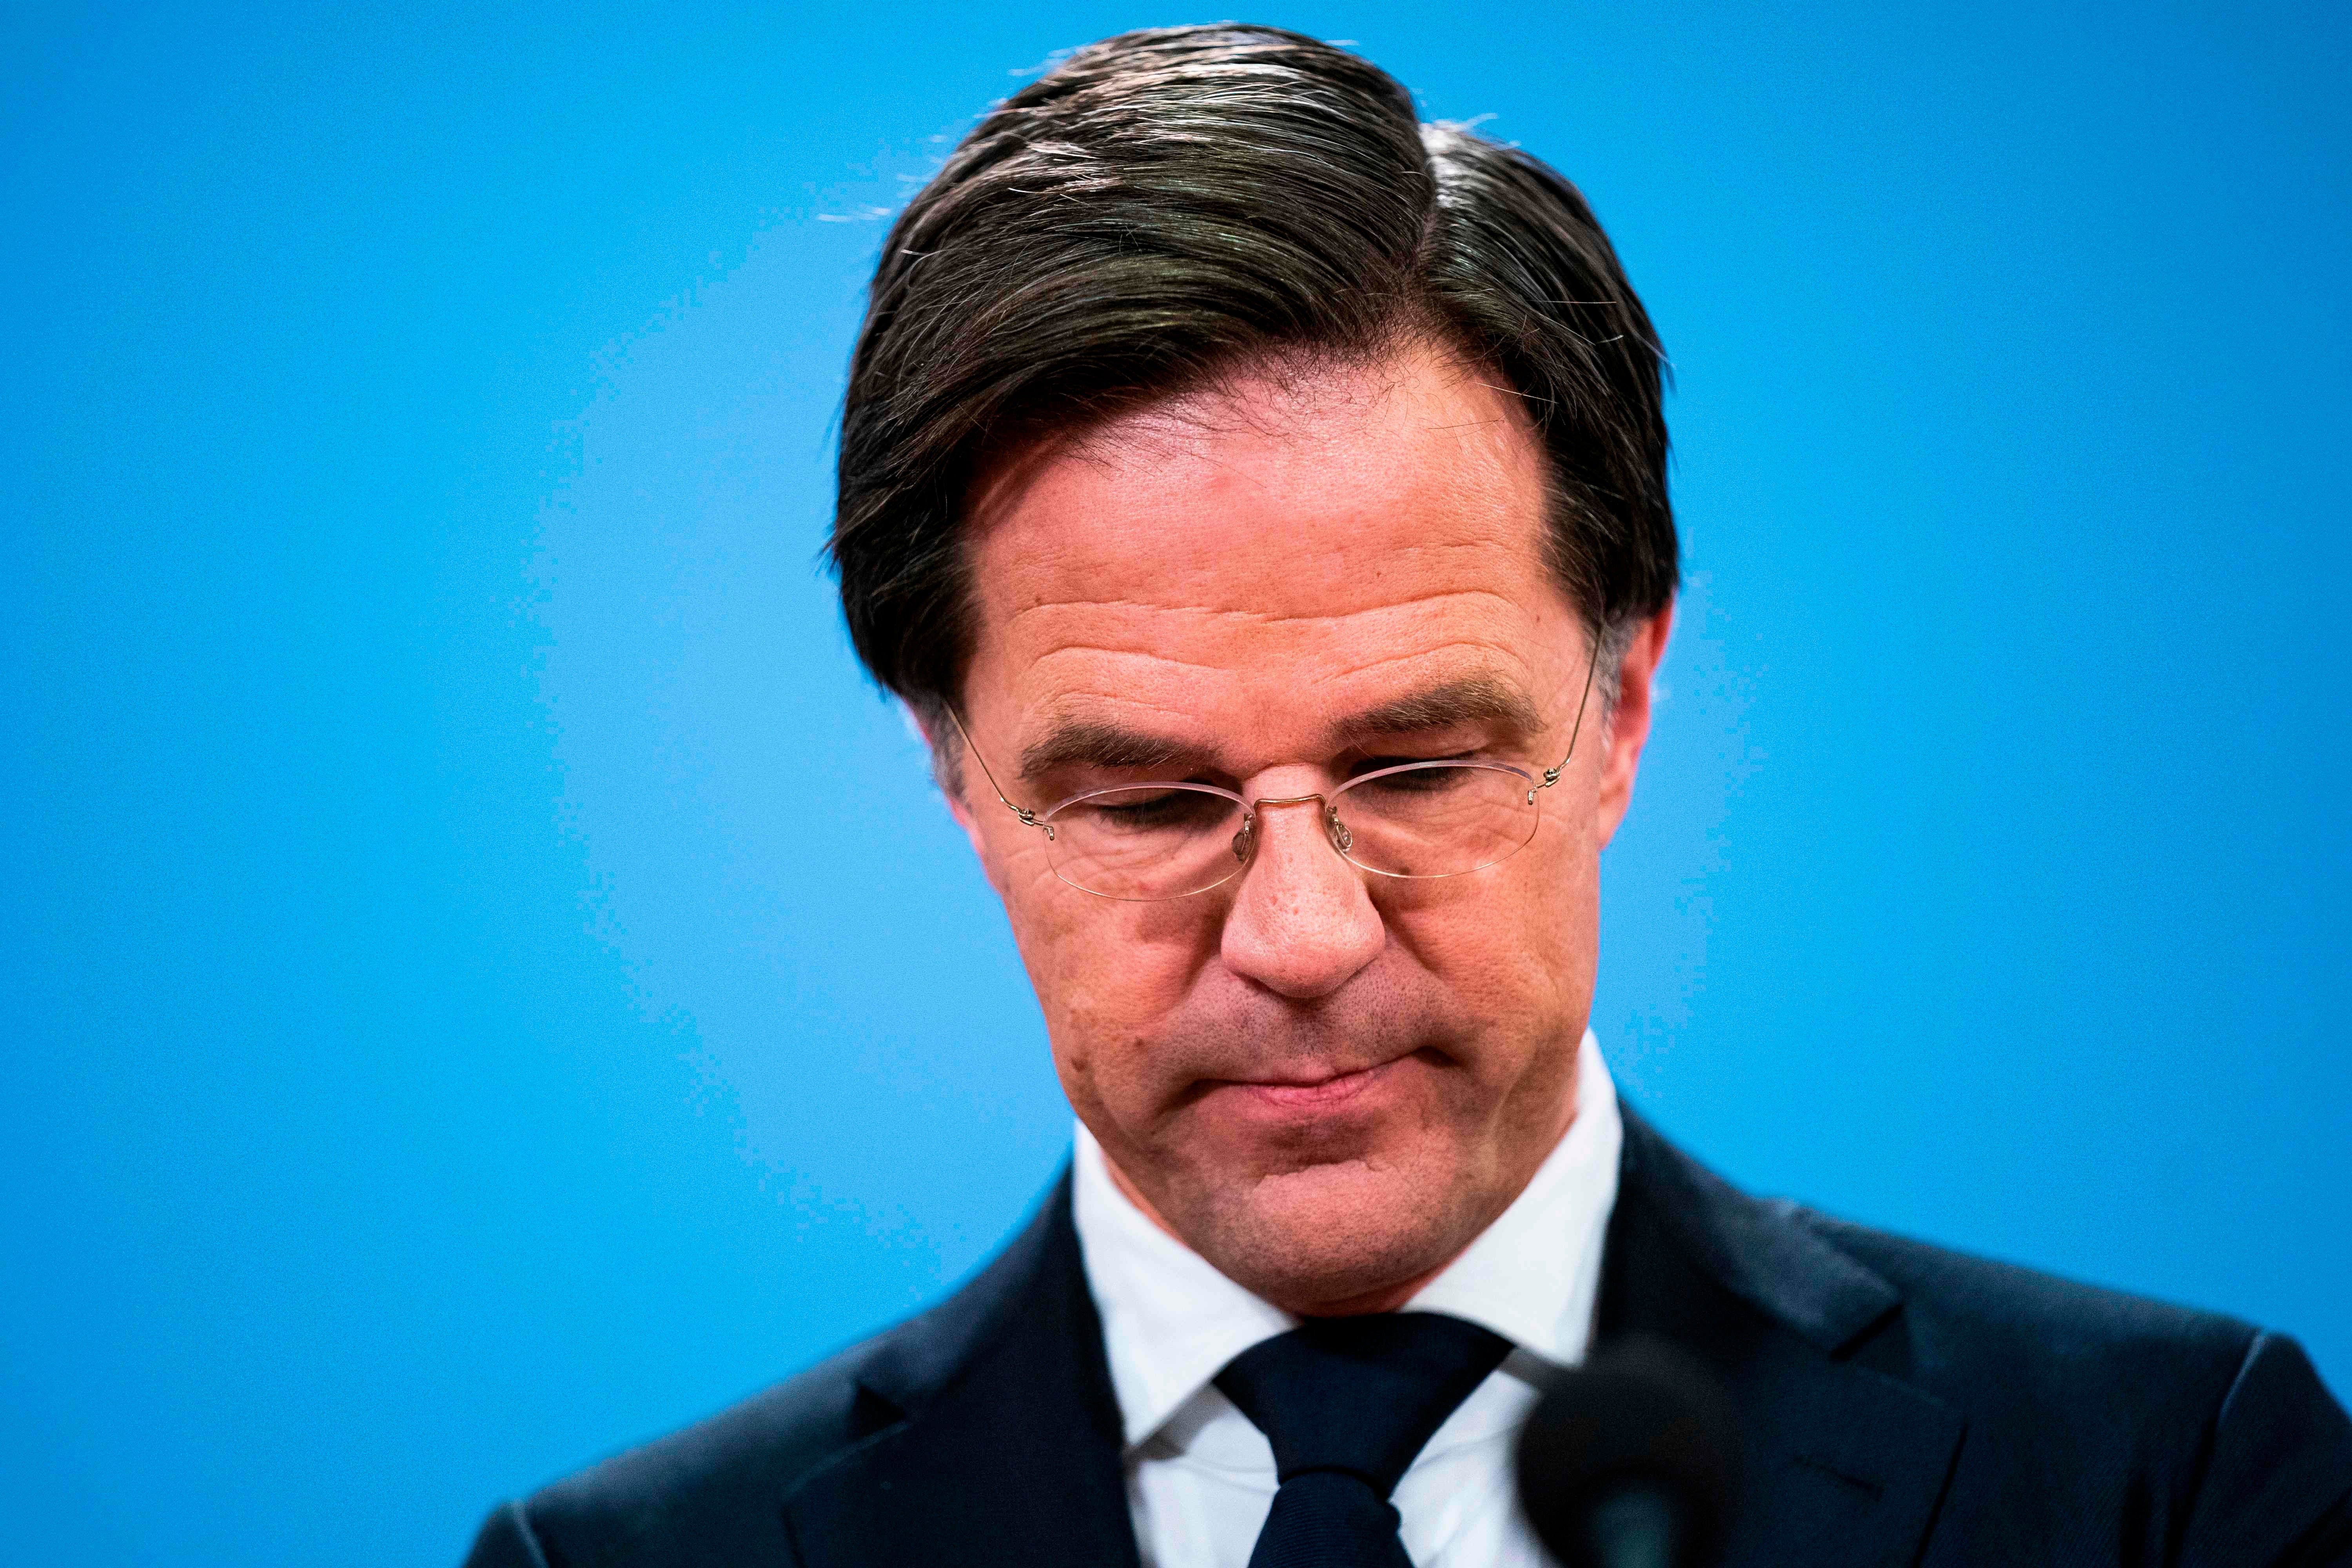 Mark Rutte handed his resignation to King Willem-Alexander